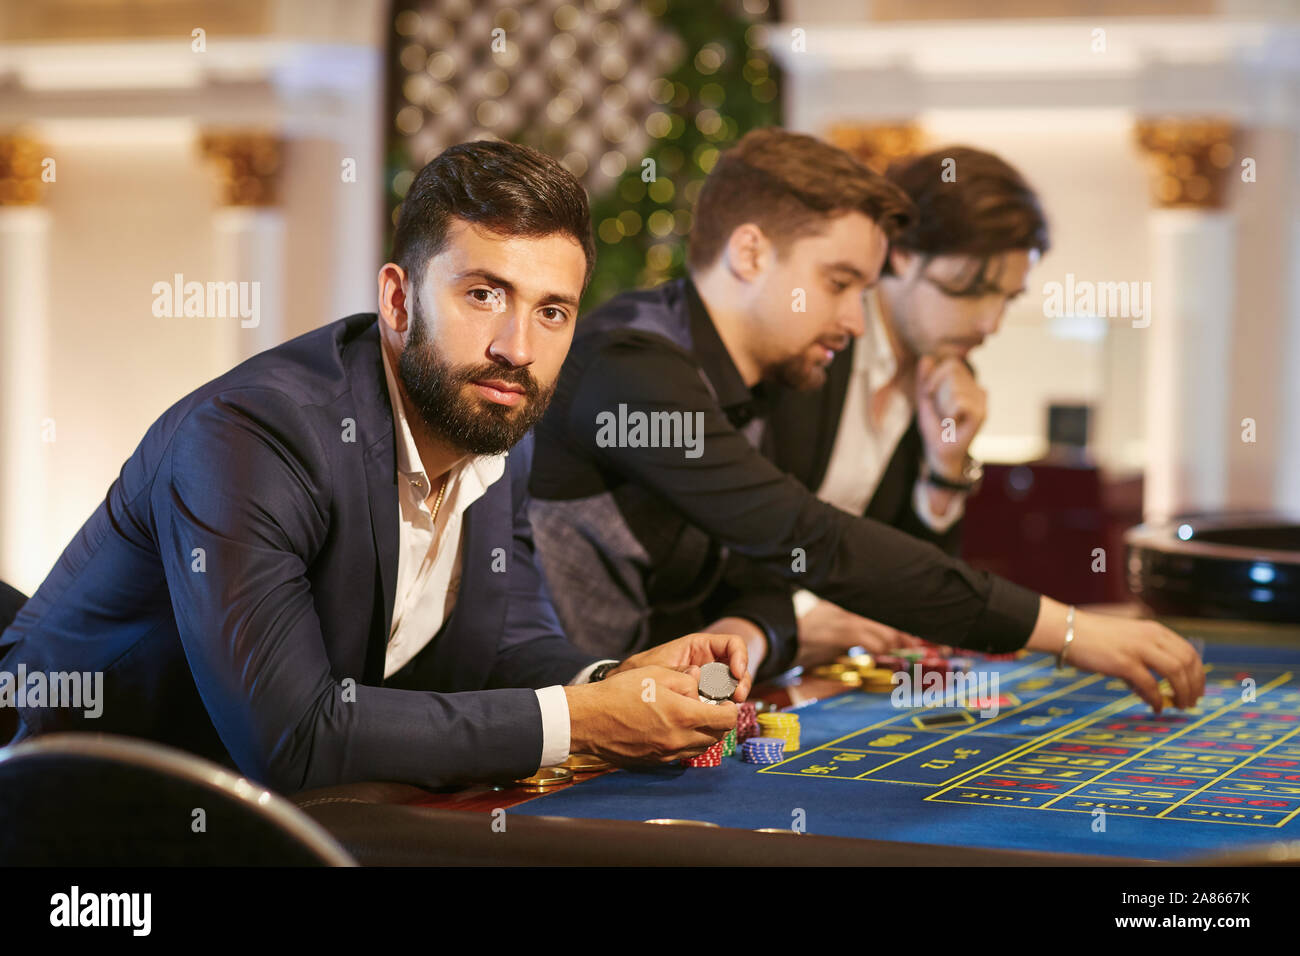 A man in a suit with a glass of whiskey sitting at table roulette playing poker at a casino. Stock Photo